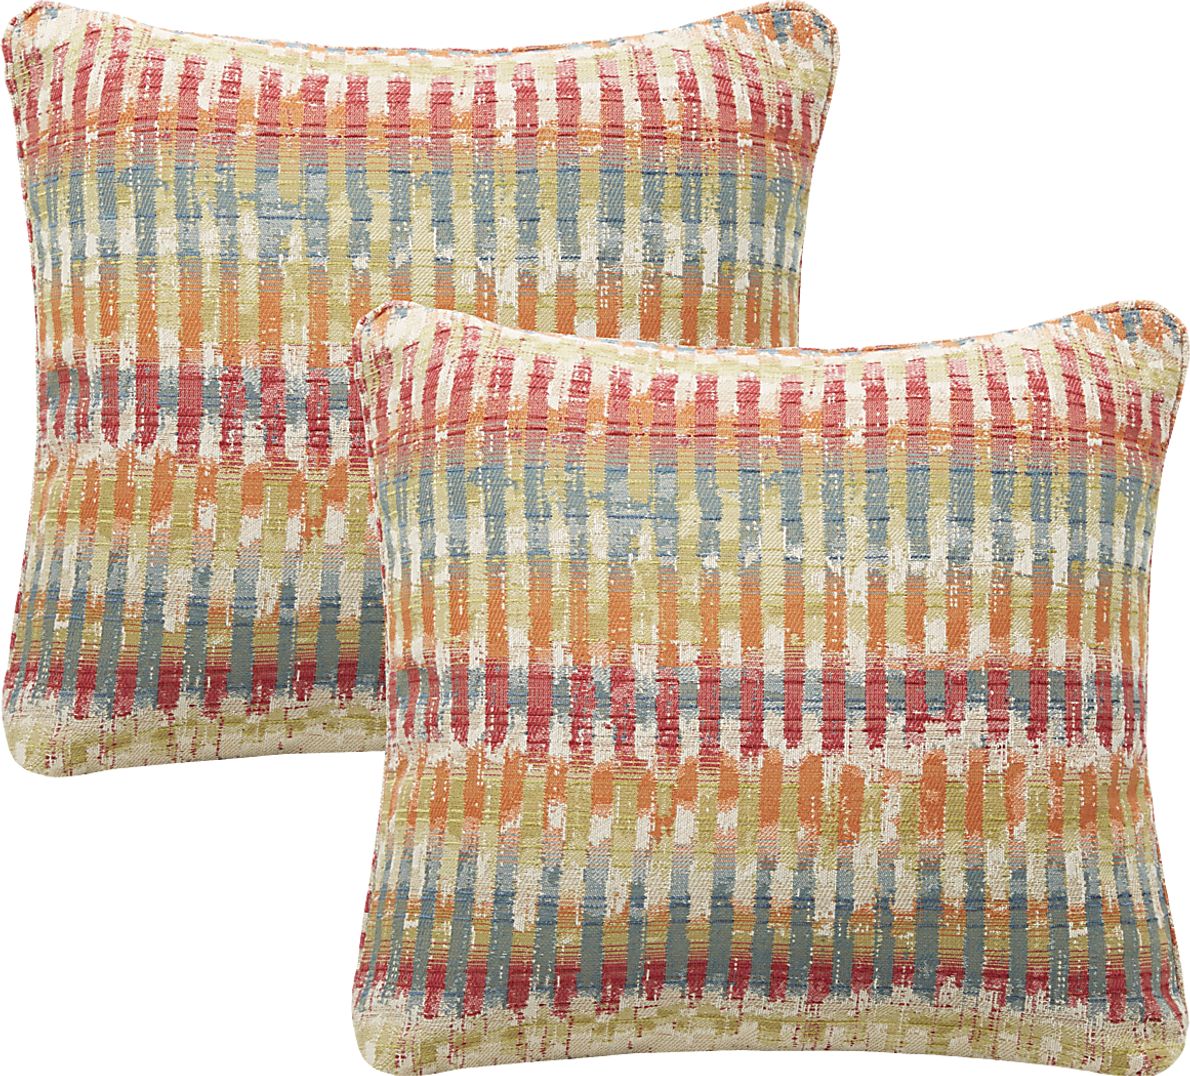 https://assets.roomstogo.com/product/isofa-handcraft-multi-accent-pillows-set-of-2_18991756_image-item?cache-id=093e60660fe1024b6fdd0a9f0e659bf8&h=1190&w=1190